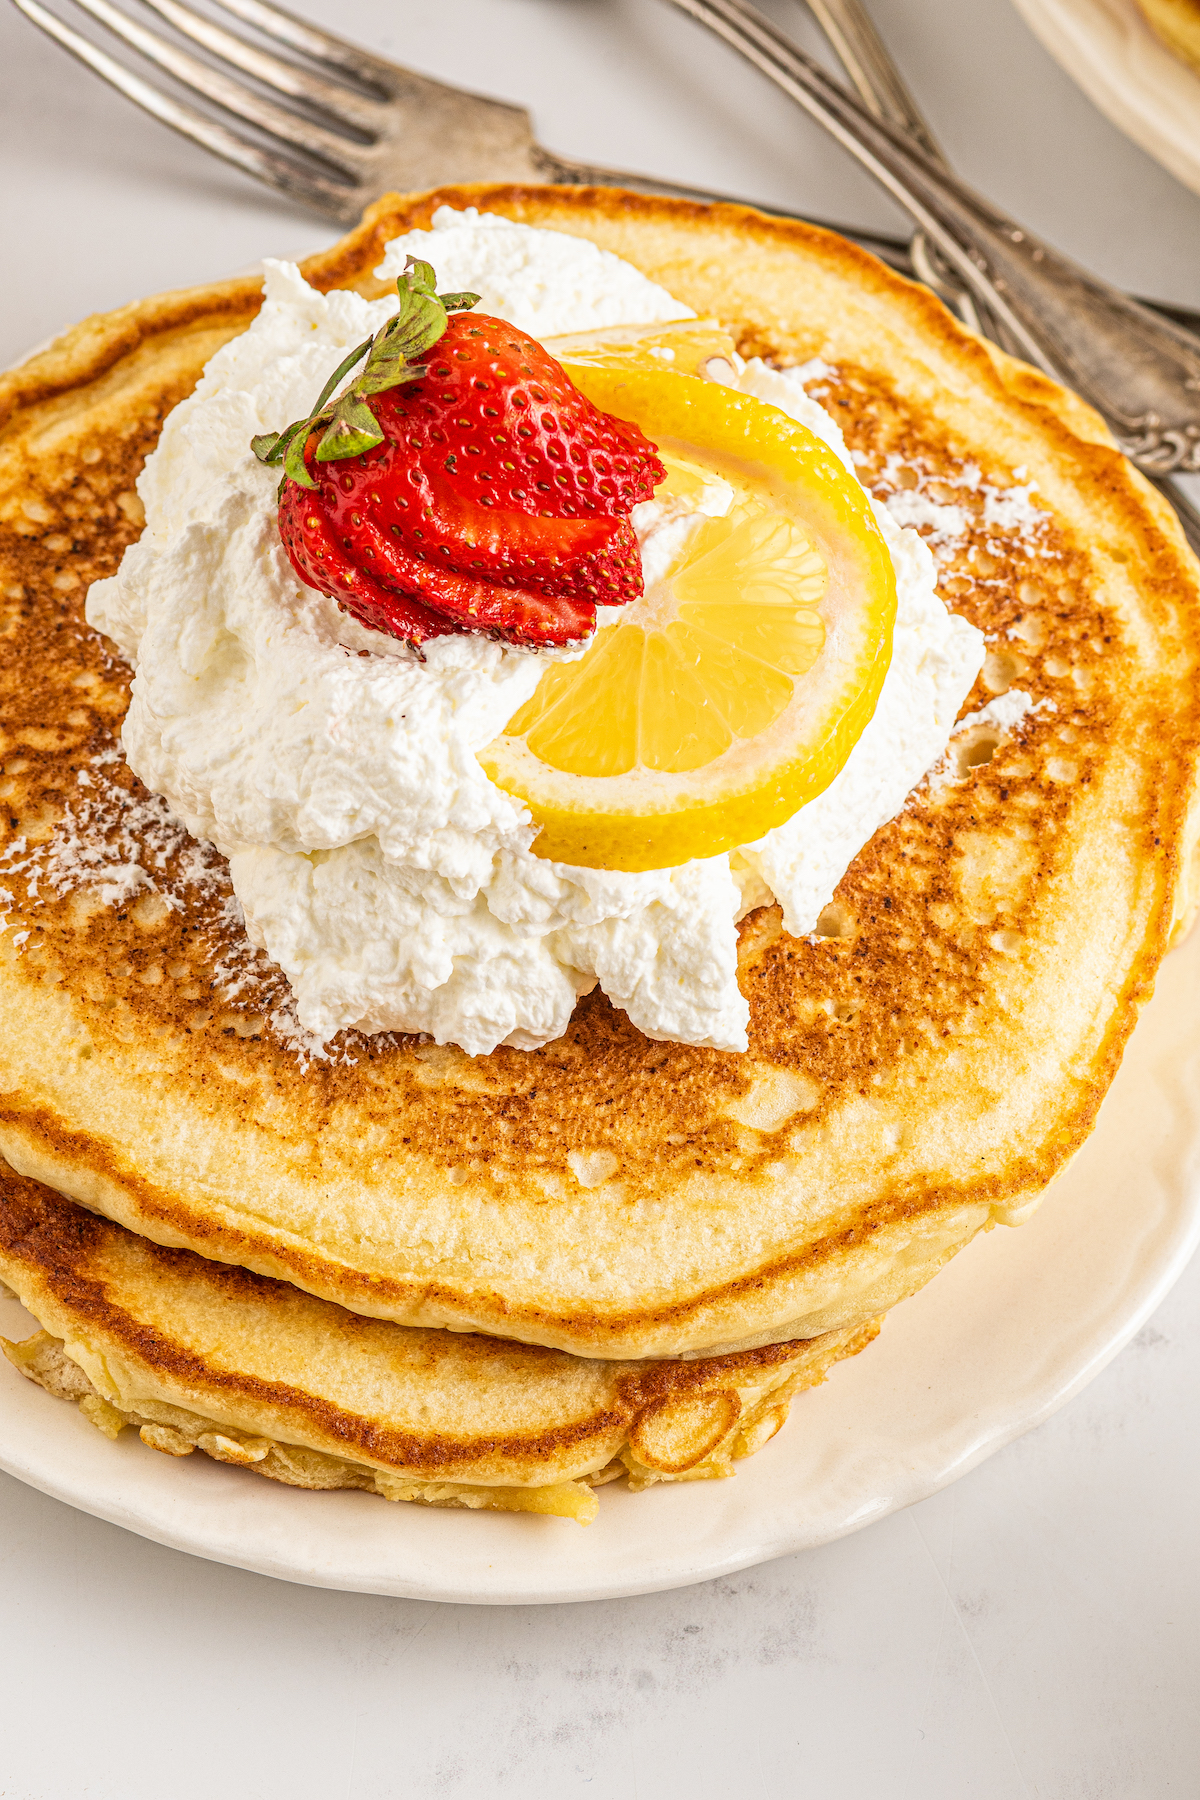 A stack of pancakes topped with whipped cream, berries, and lemon.